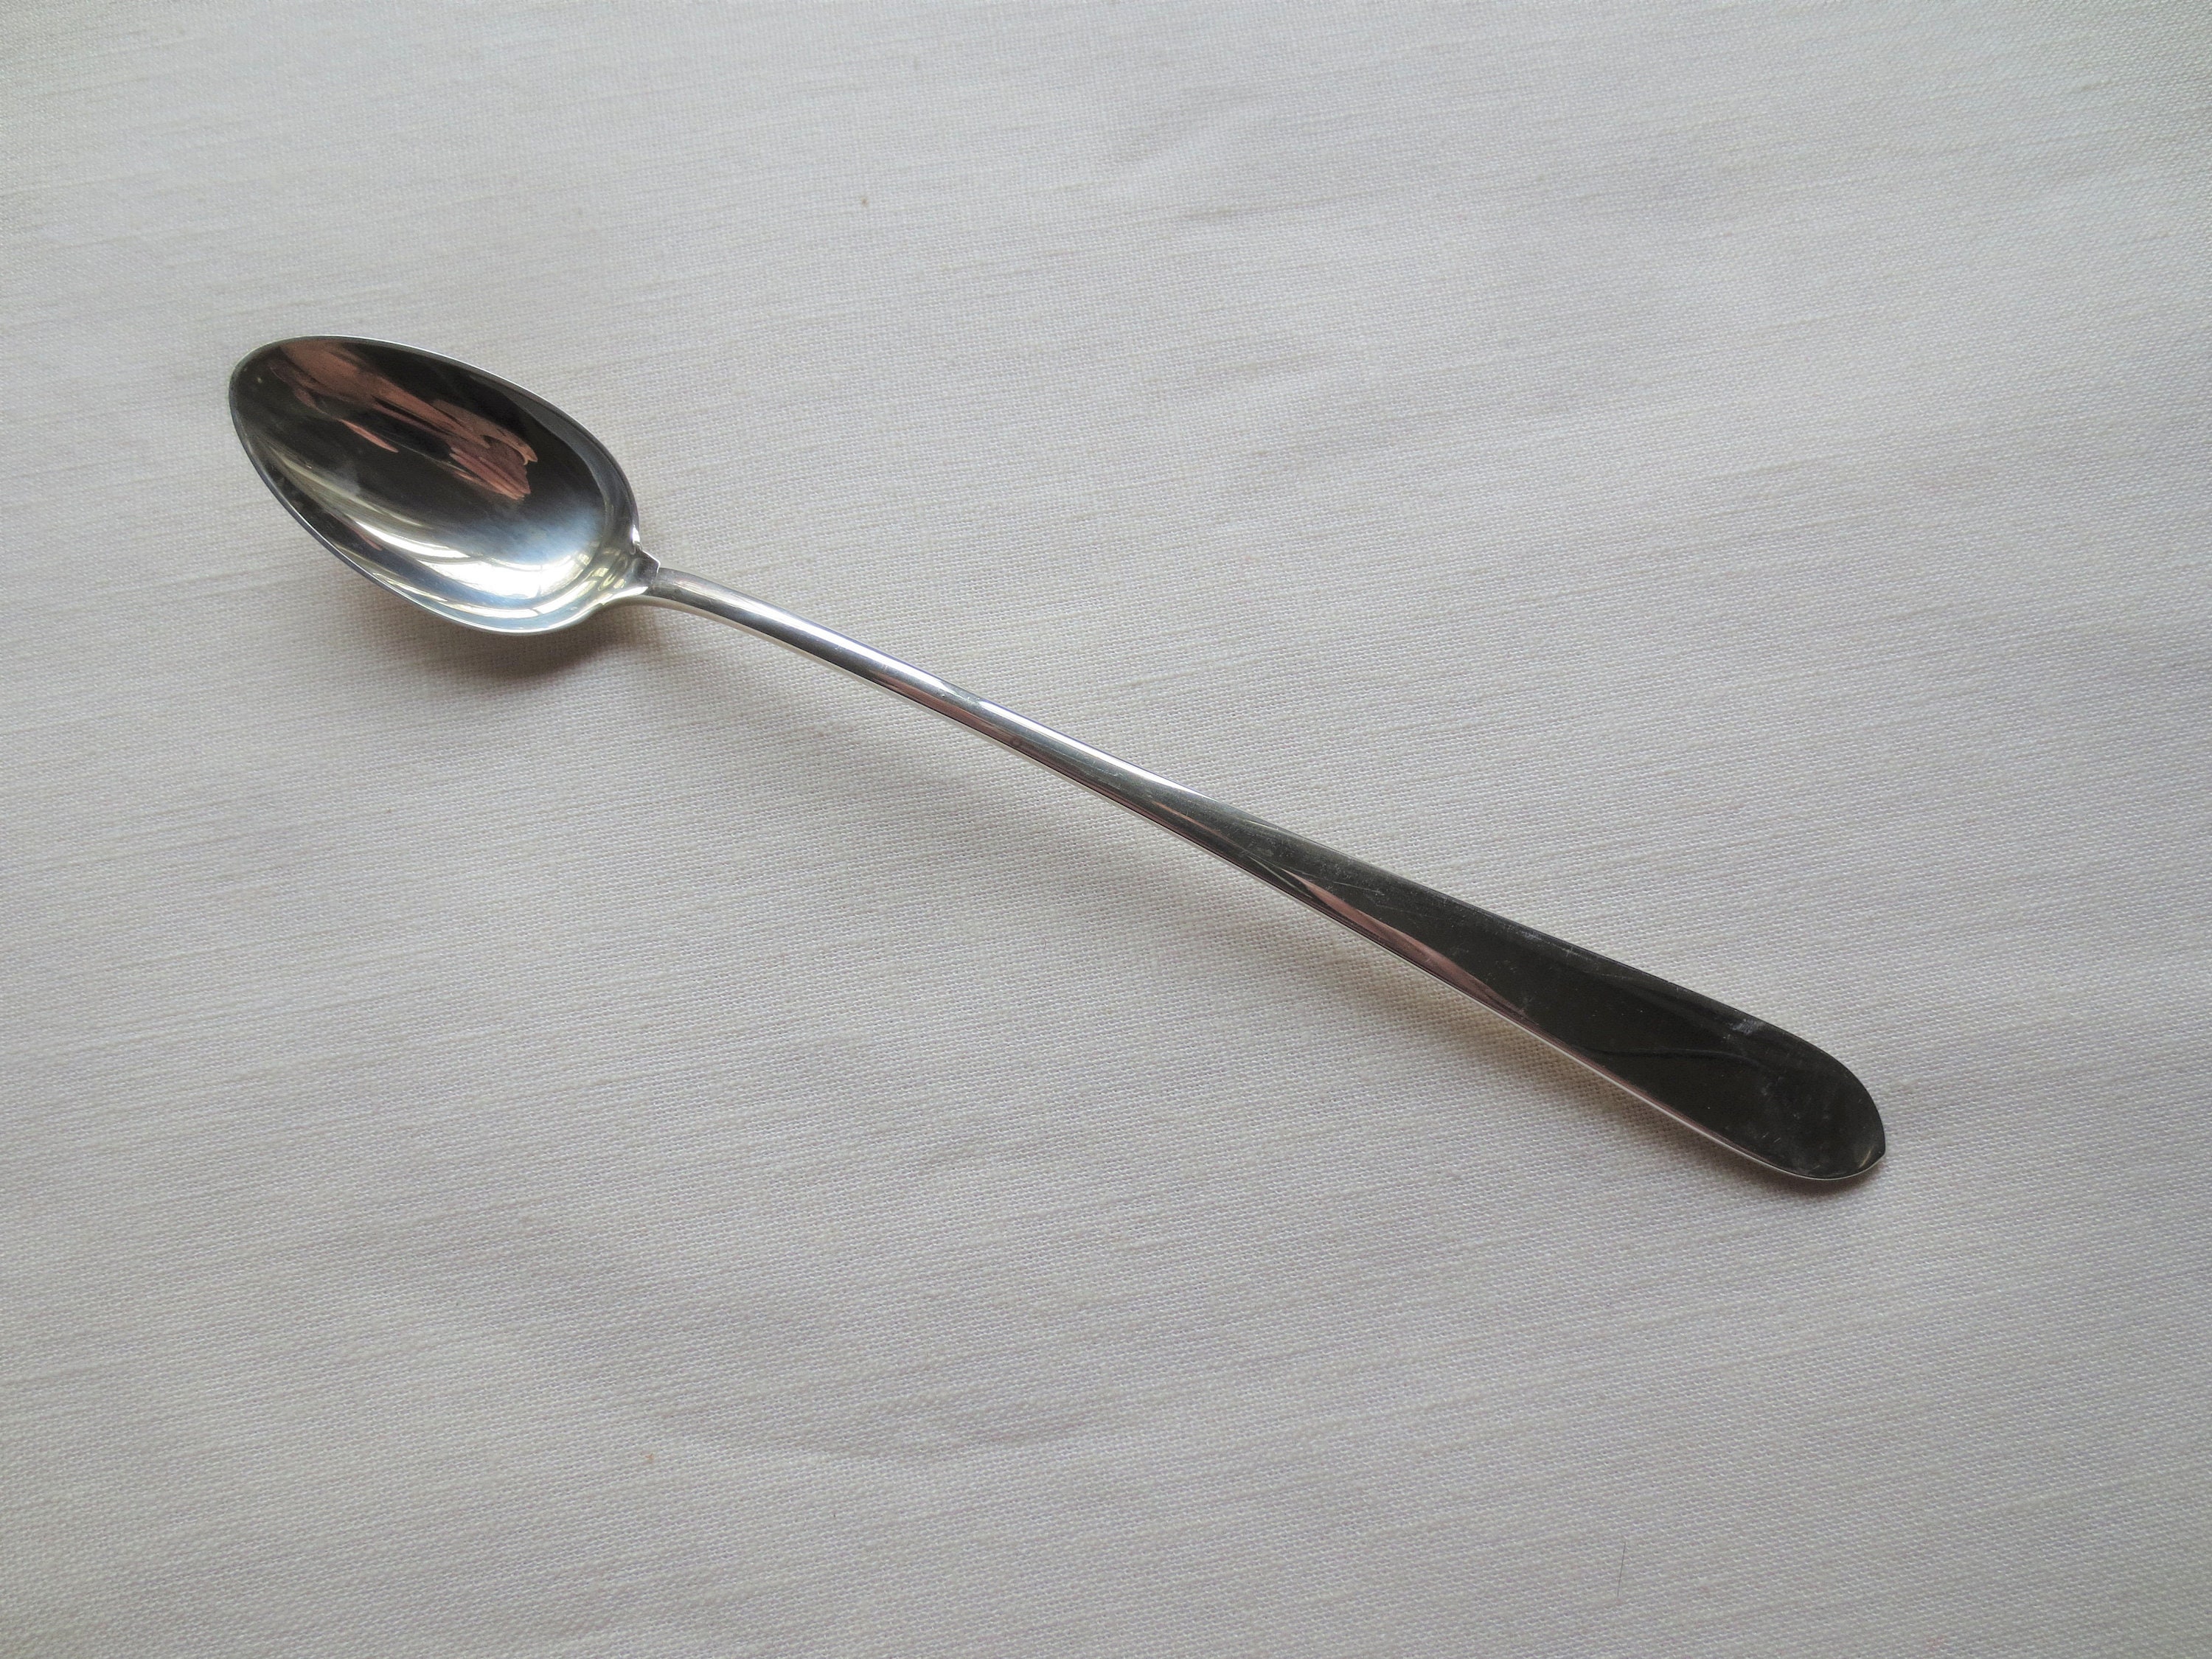 Details about   Sterling KIRK Iced Tea Spoon 1850 WADEFIELD ~ mono 